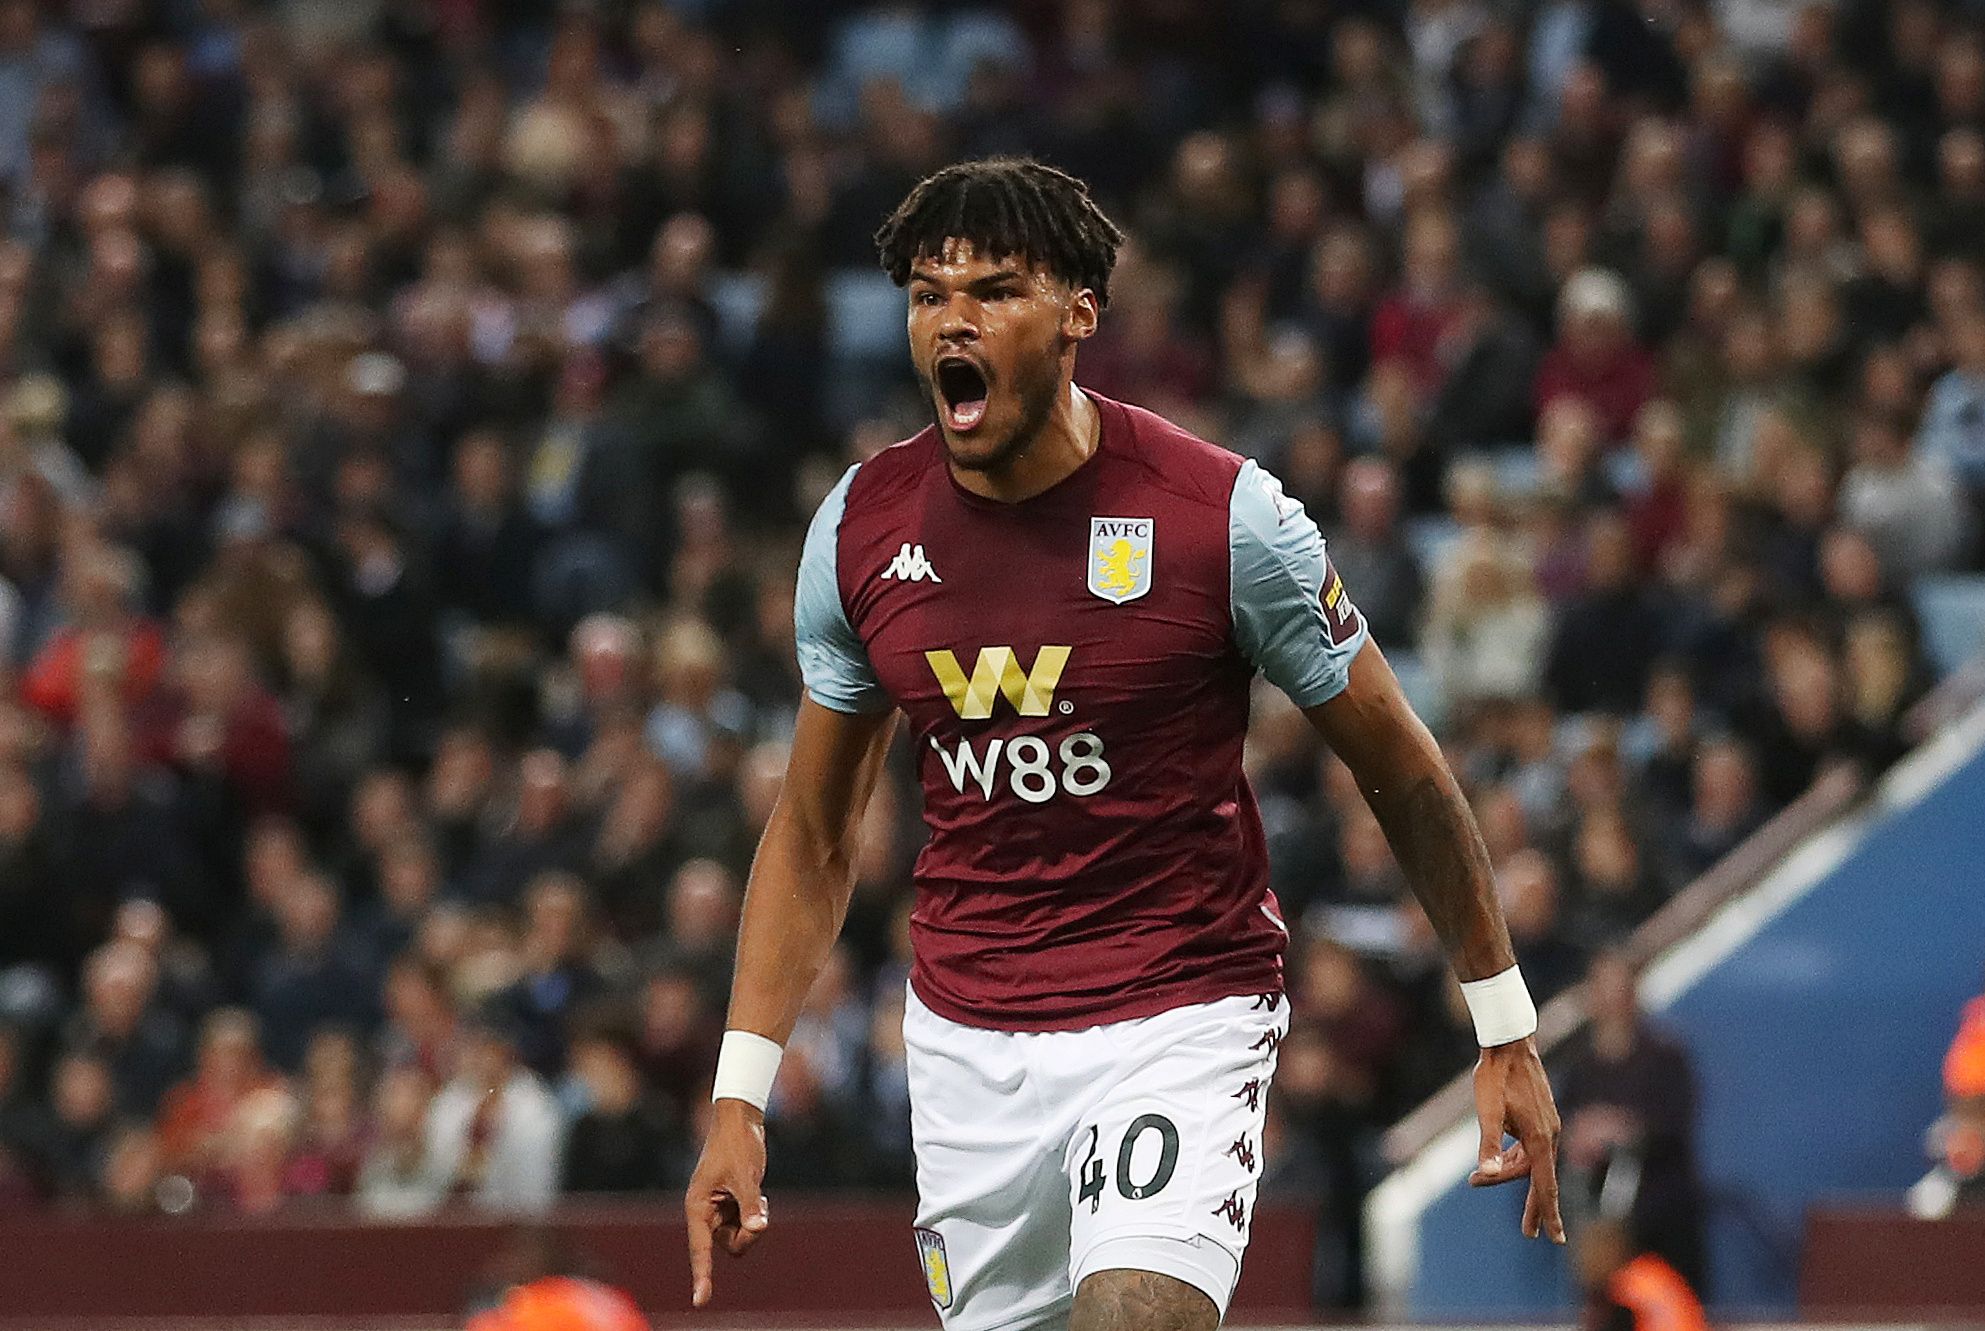 Soccer Football - Premier League - Aston Villa v West Ham United - Villa Park, Birmingham, Britain - September 16, 2019   Aston Villa's Tyrone Mings reacts to teammate Anwar El Ghazi   Action Images via Reuters/Carl Recine    EDITORIAL USE ONLY. No use with unauthorized audio, video, data, fixture lists, club/league logos or 